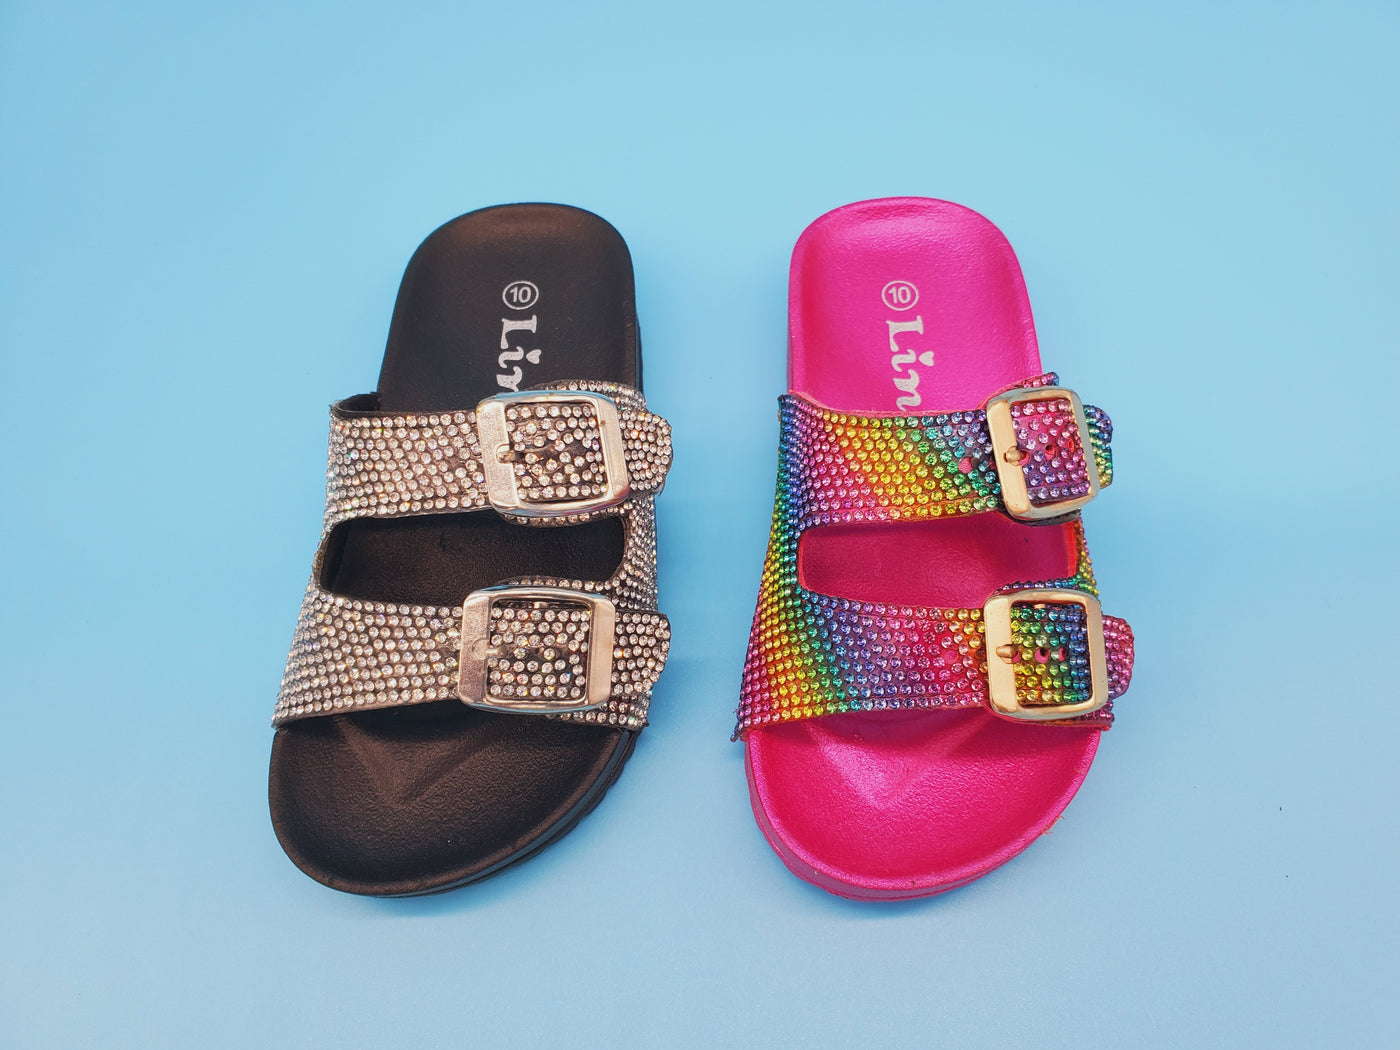 Kids Crystal Covered Slippers